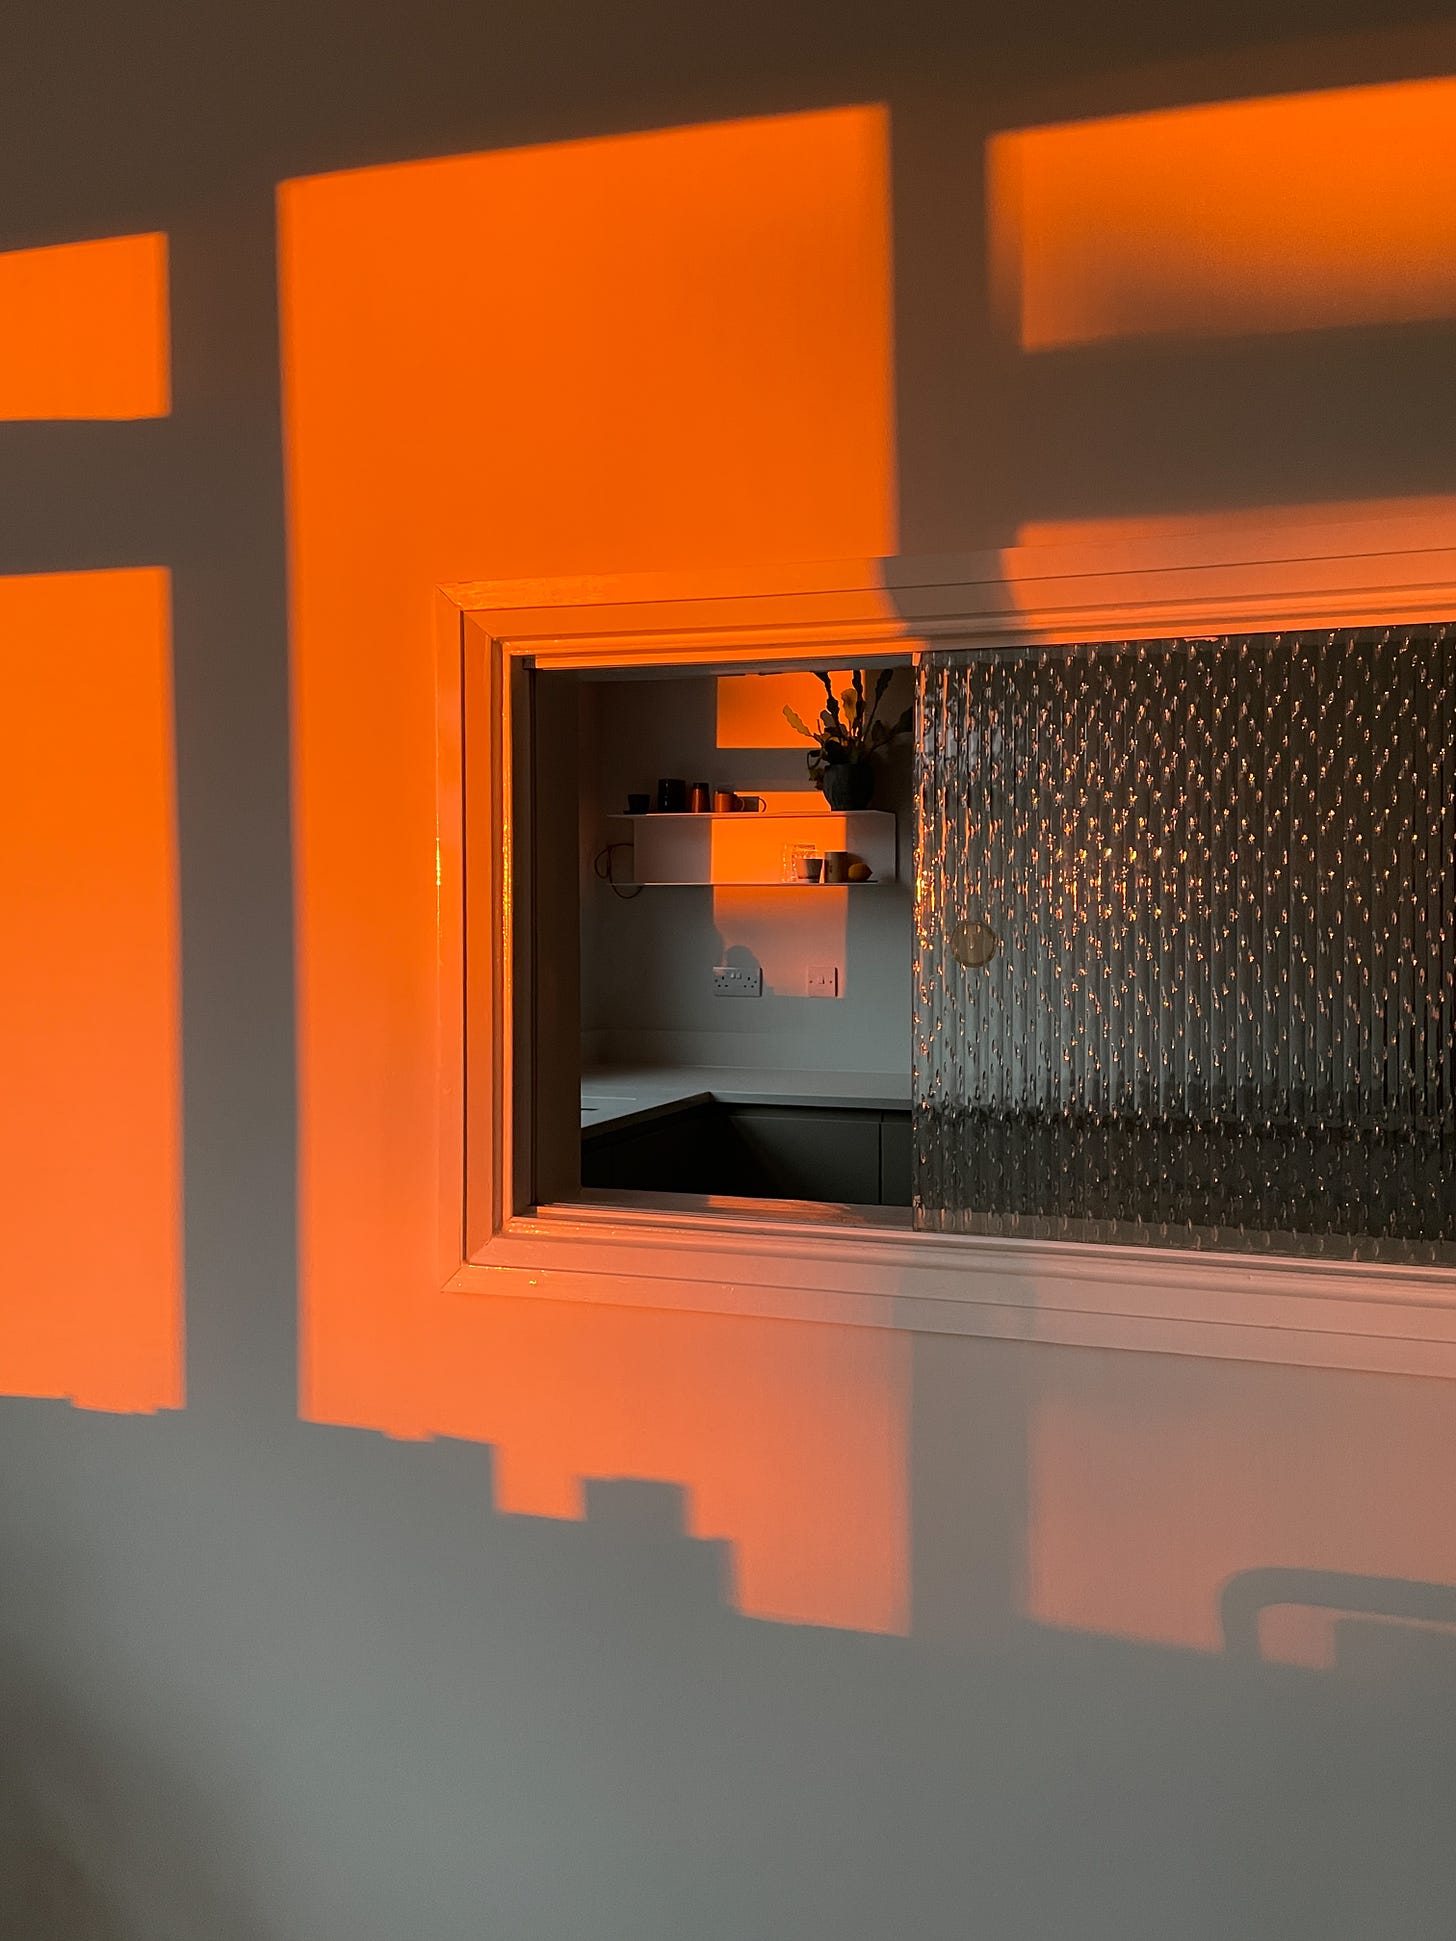 A wall with a window through to another room. The entire scene is lit by the morning sun and is fiery orange.